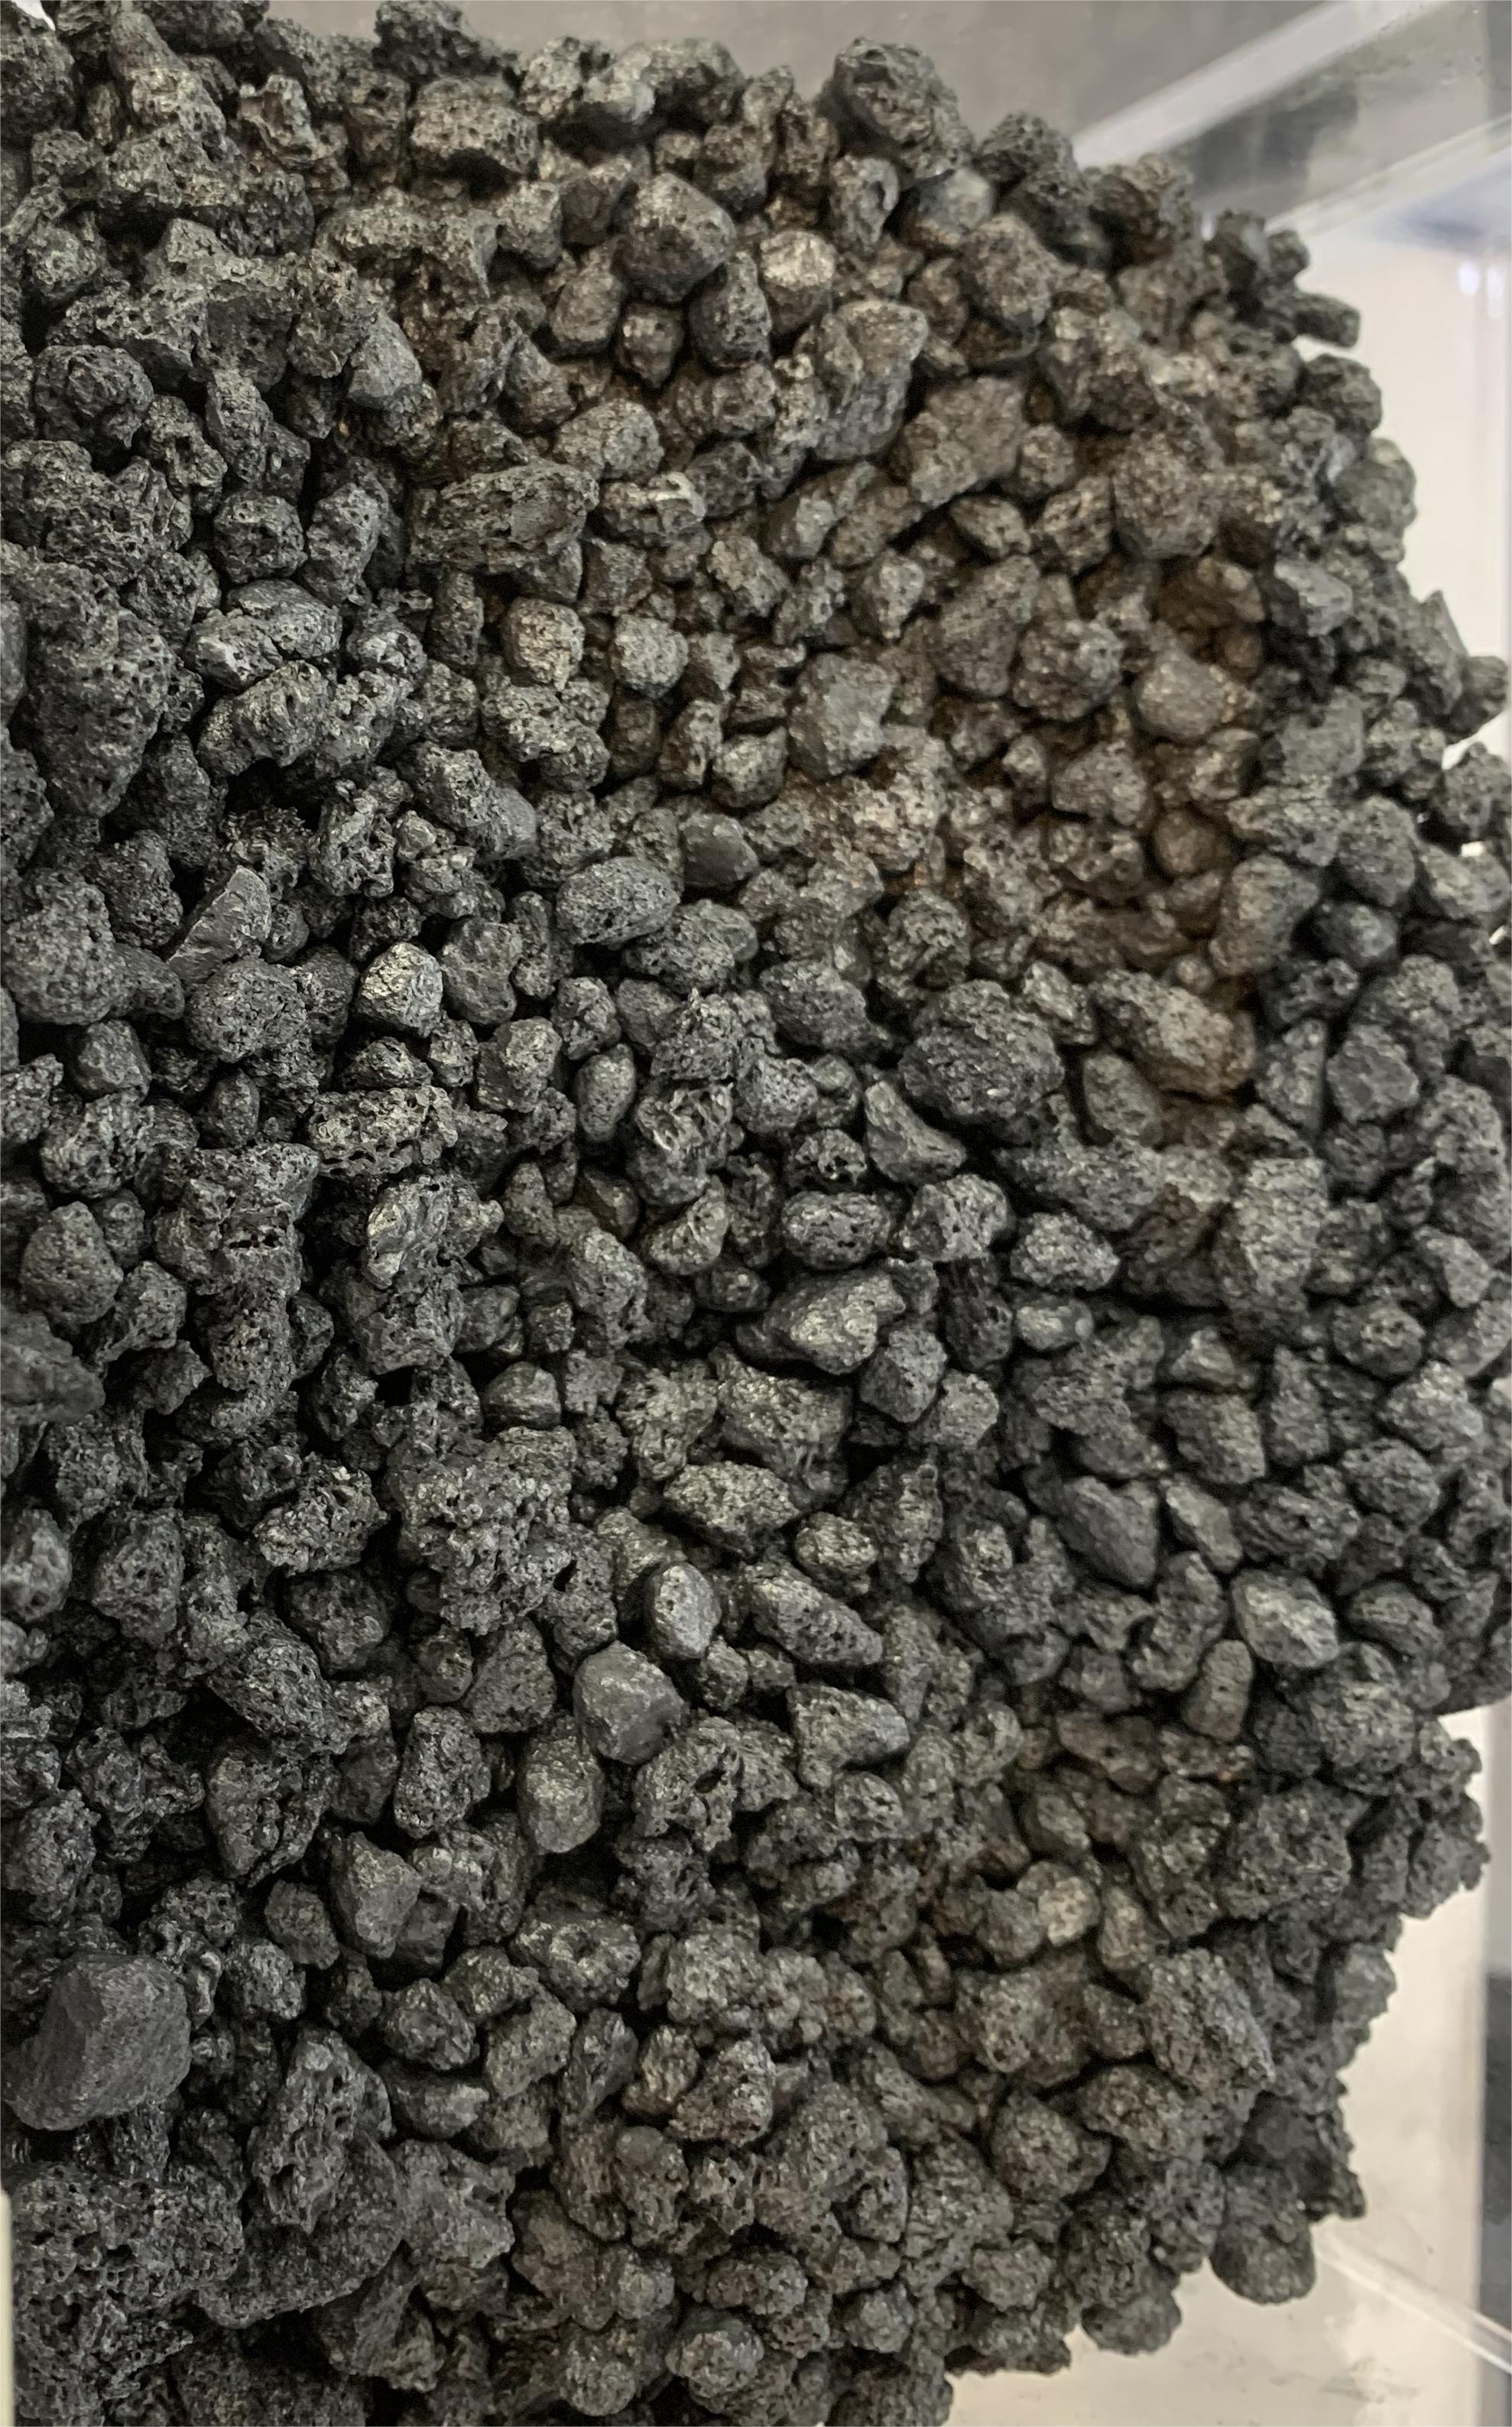 The domestic refinery petroleum coke market price fluctuated slightly